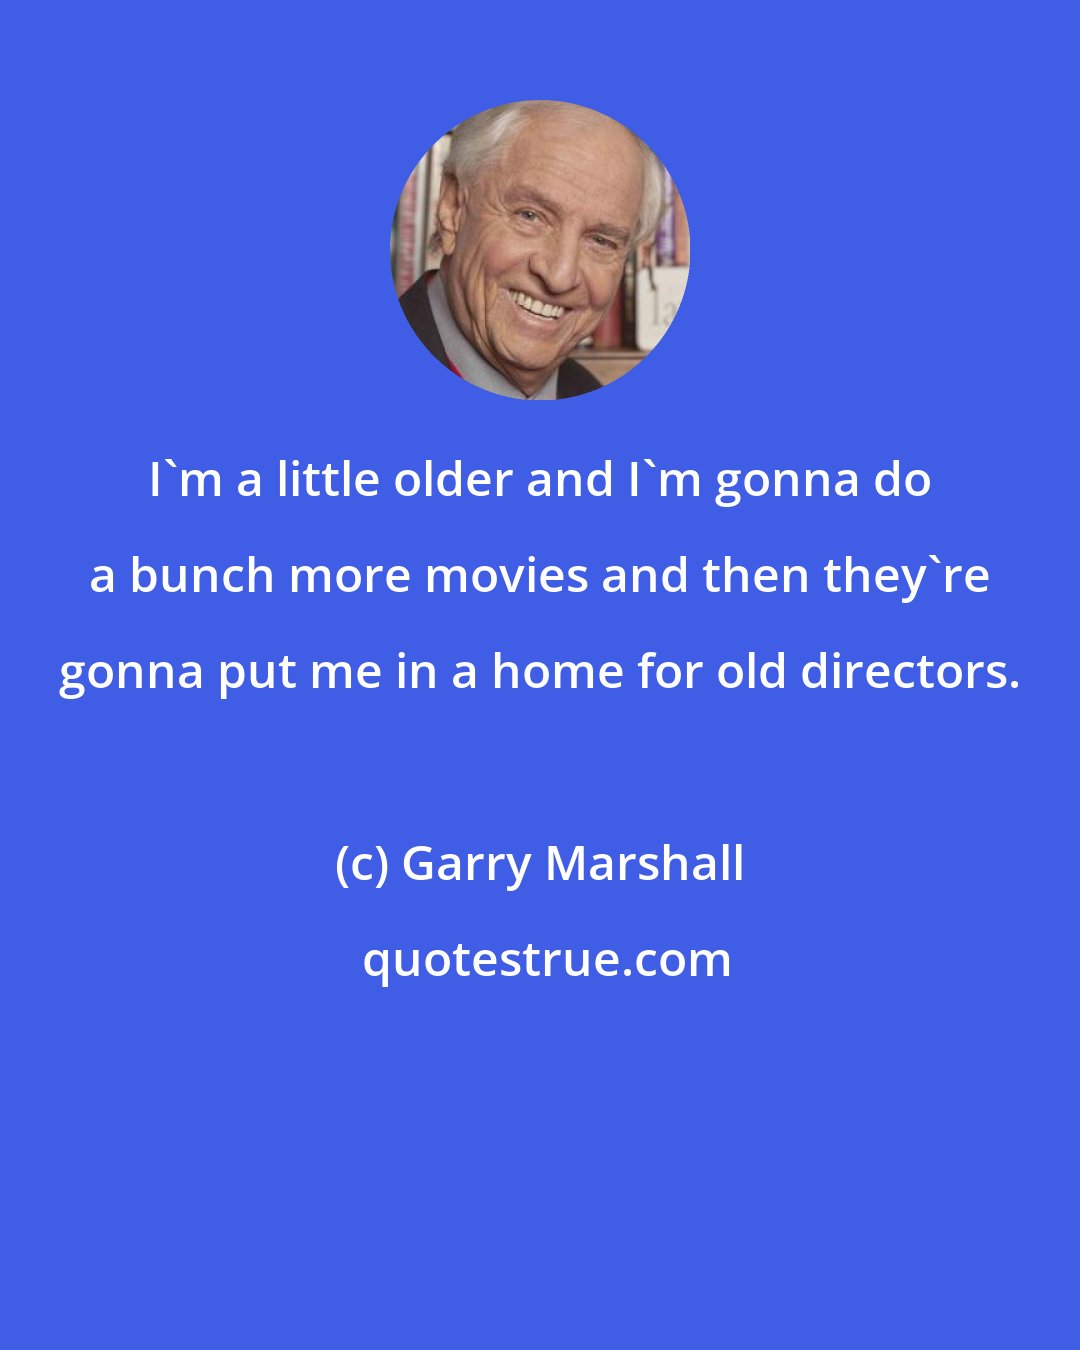 Garry Marshall: I'm a little older and I'm gonna do a bunch more movies and then they're gonna put me in a home for old directors.